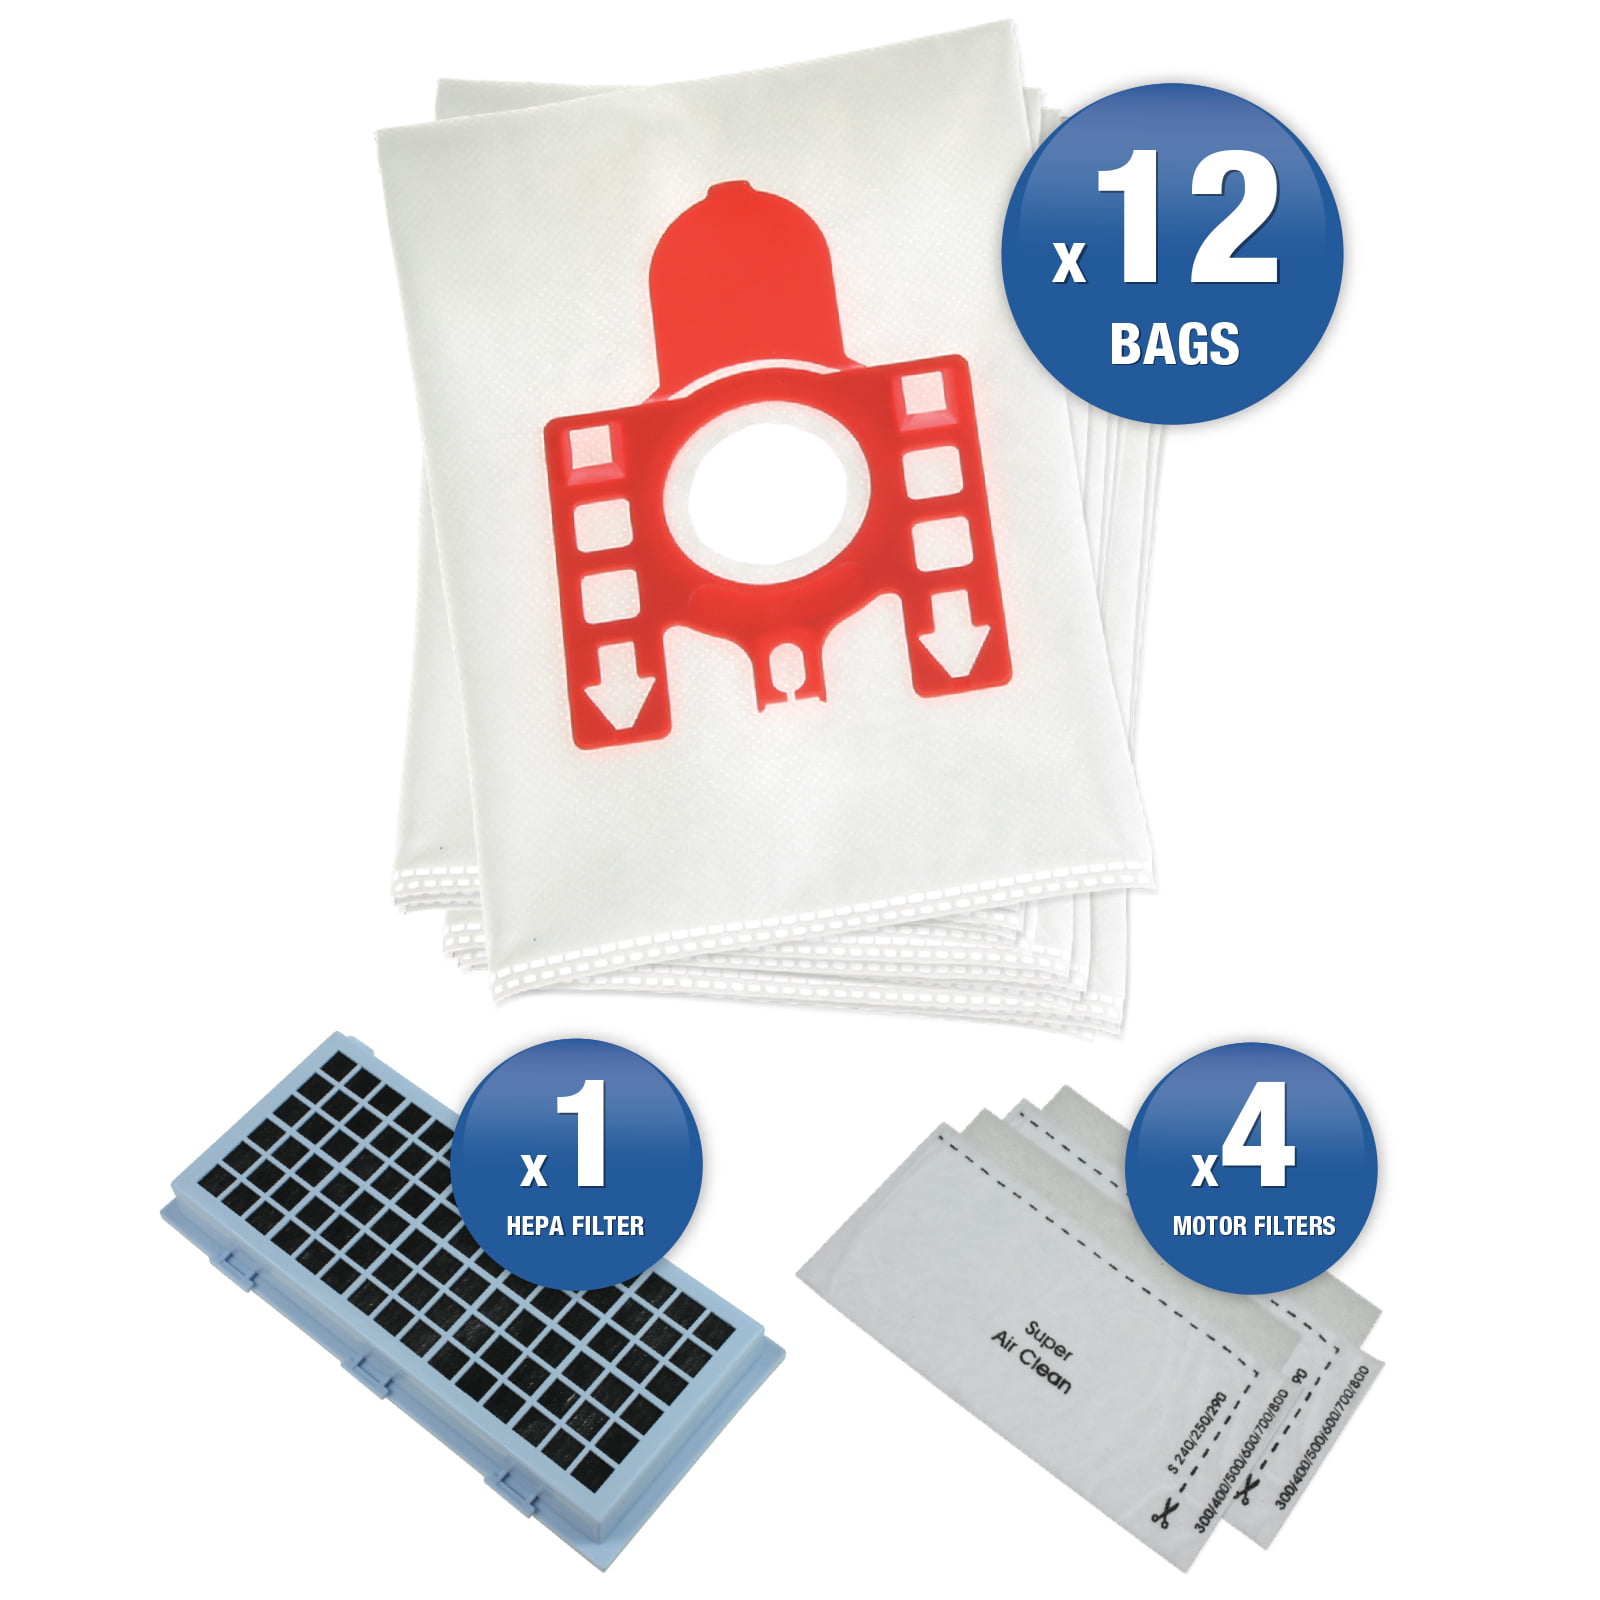 QPro by Masterpart Microfibre Vacuum Cleaner Dust Bags Compatiable with Miele Type GN. Fits Models Complete C2, Complete C3, Classic C1, S8, S5, S2